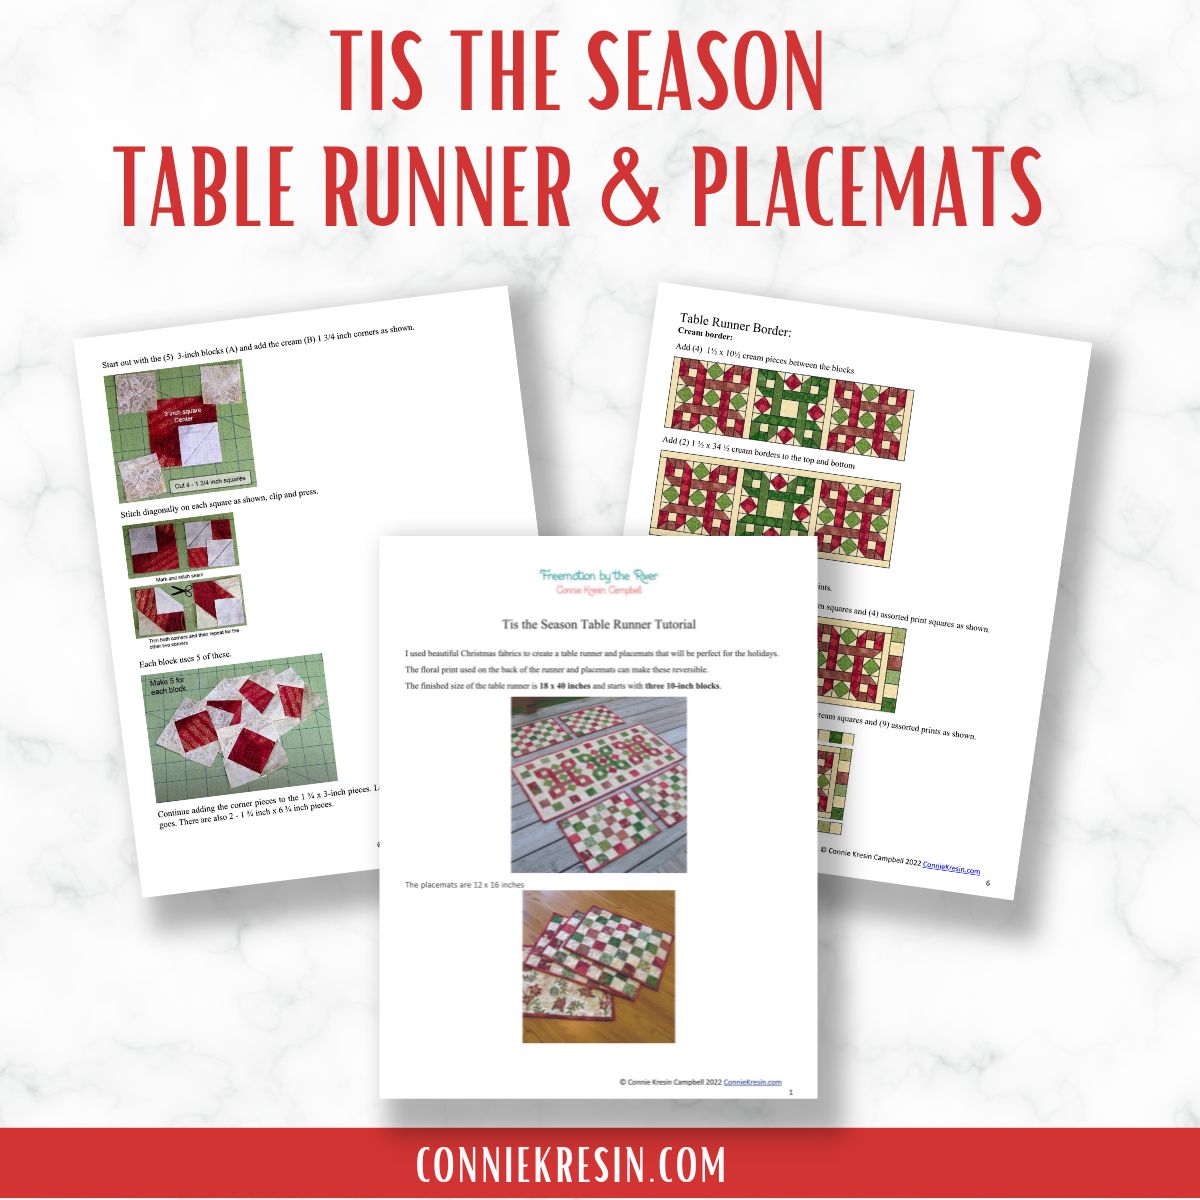 Tis the Season Holiday table runner and placemats